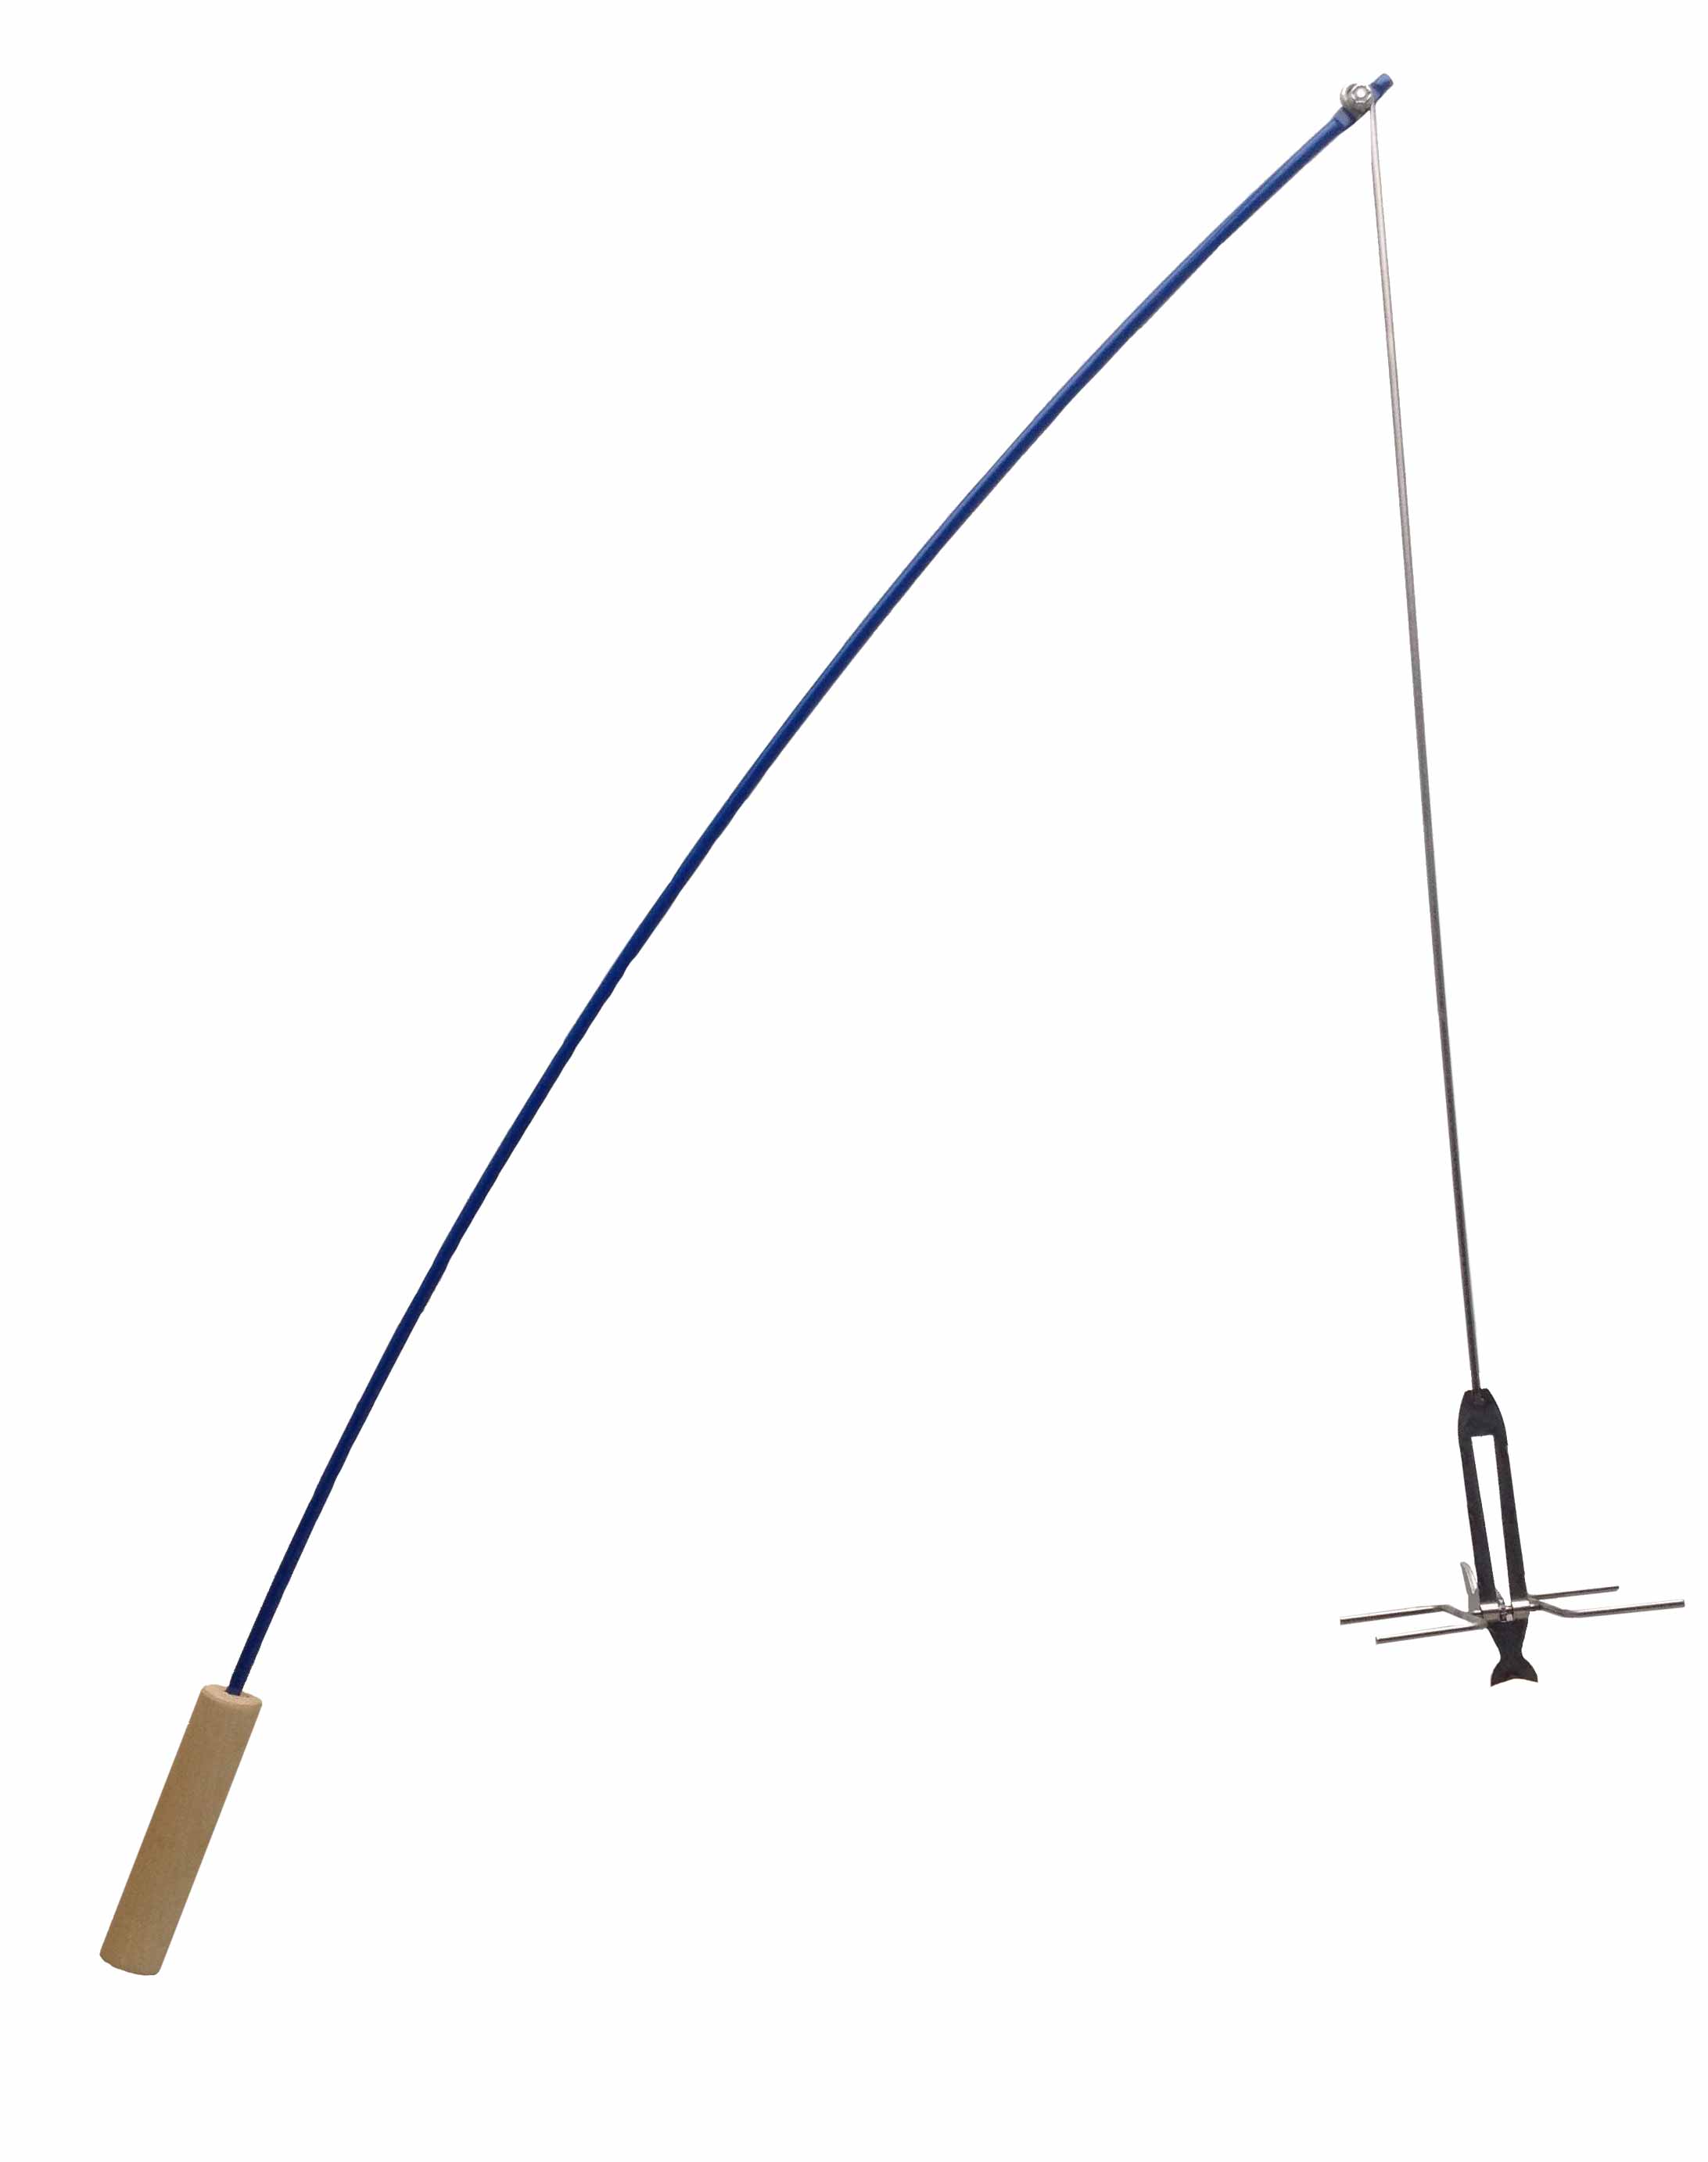 Fishing Pole Images Download Fishing Rod 2 Clipart